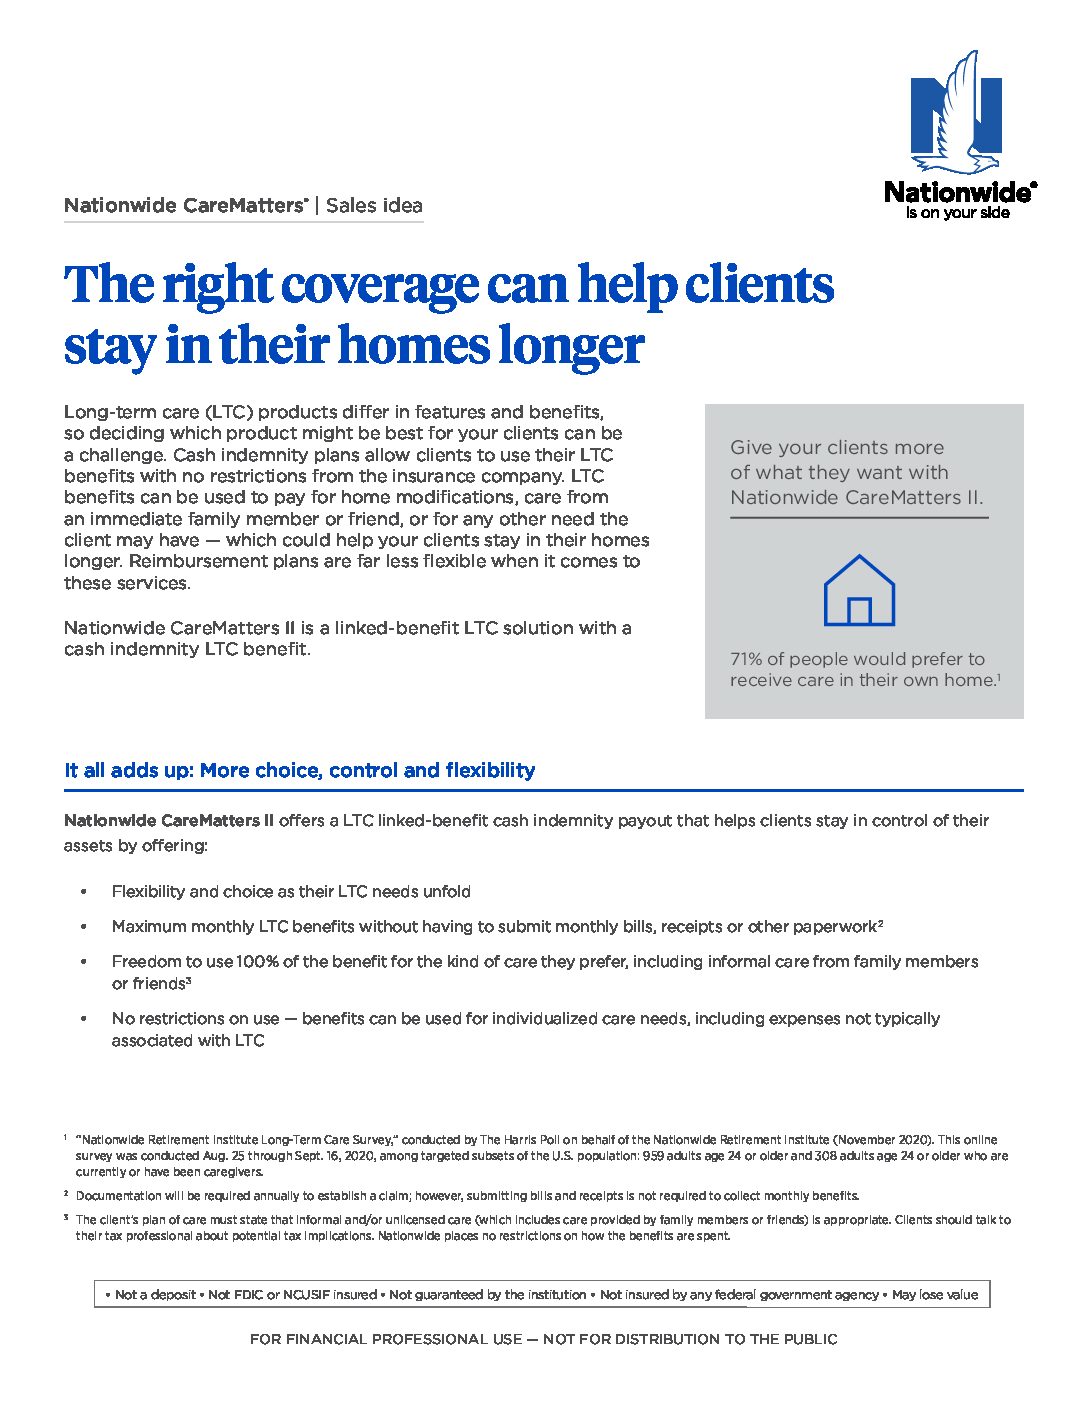 Help Clients Stay in Their Homes